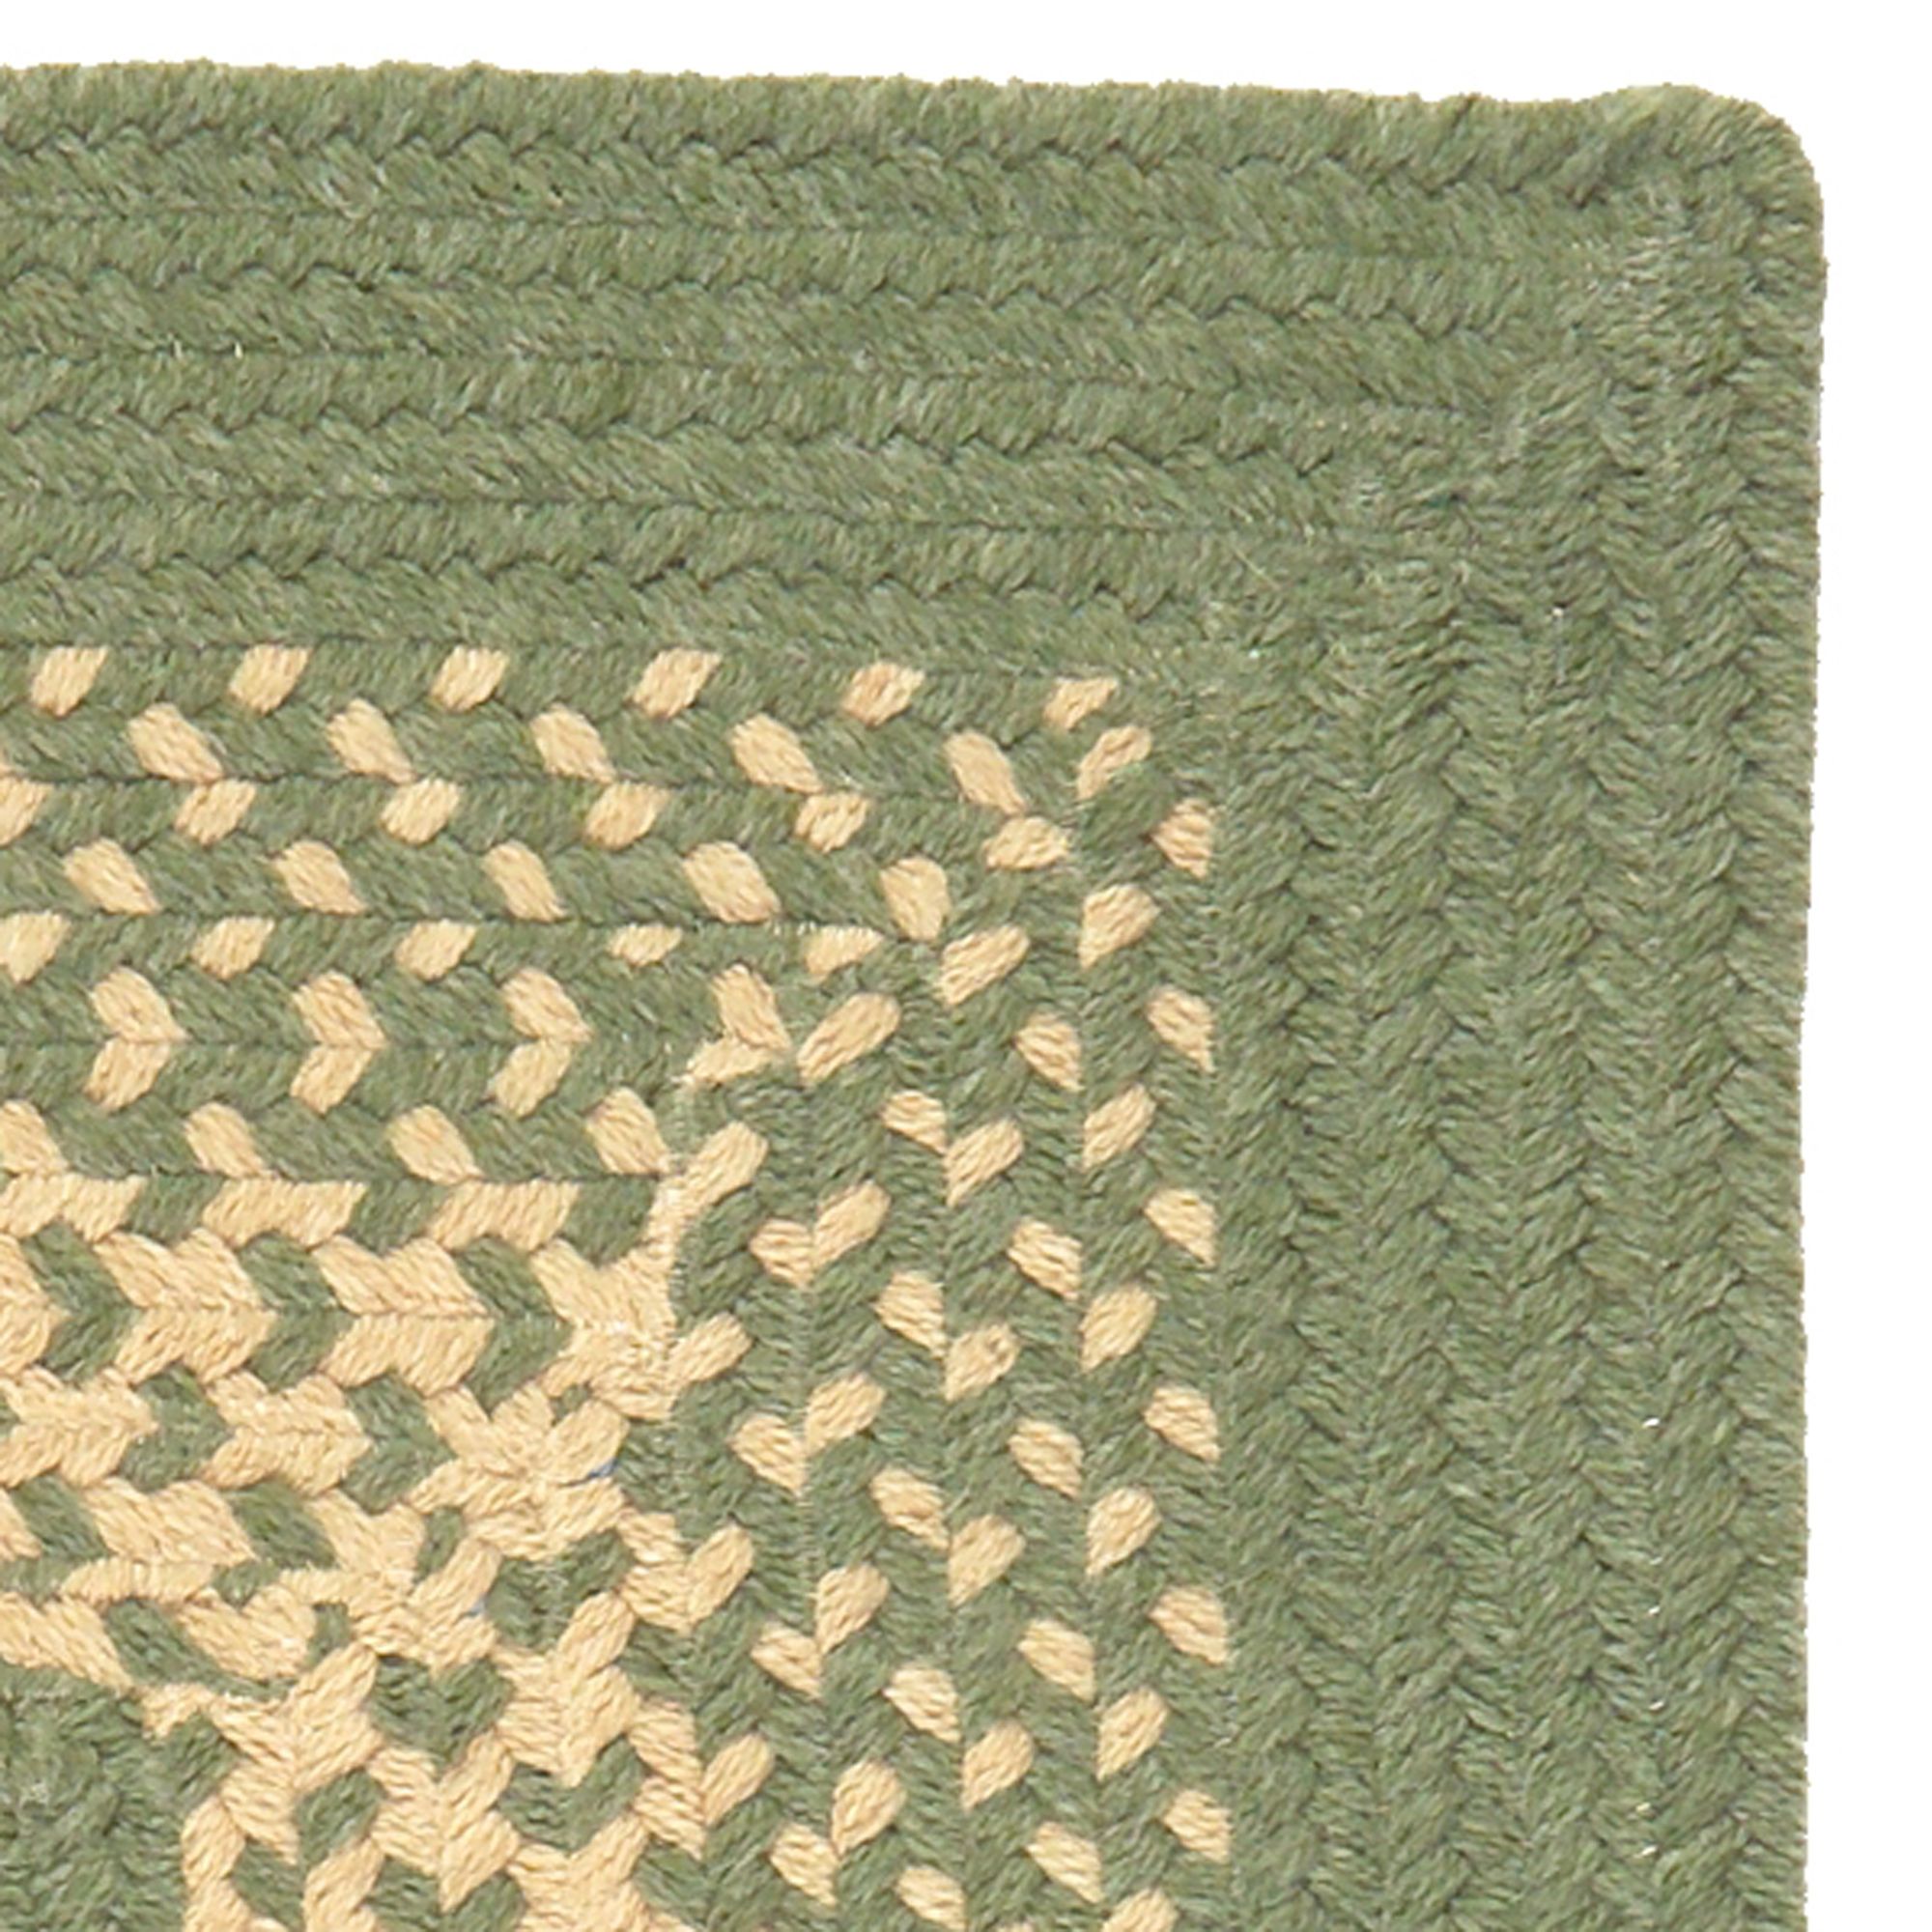 Colonial Mills 11' x 11' Green and Beige All Purpose Handcrafted Reversible Square Area Throw Rug